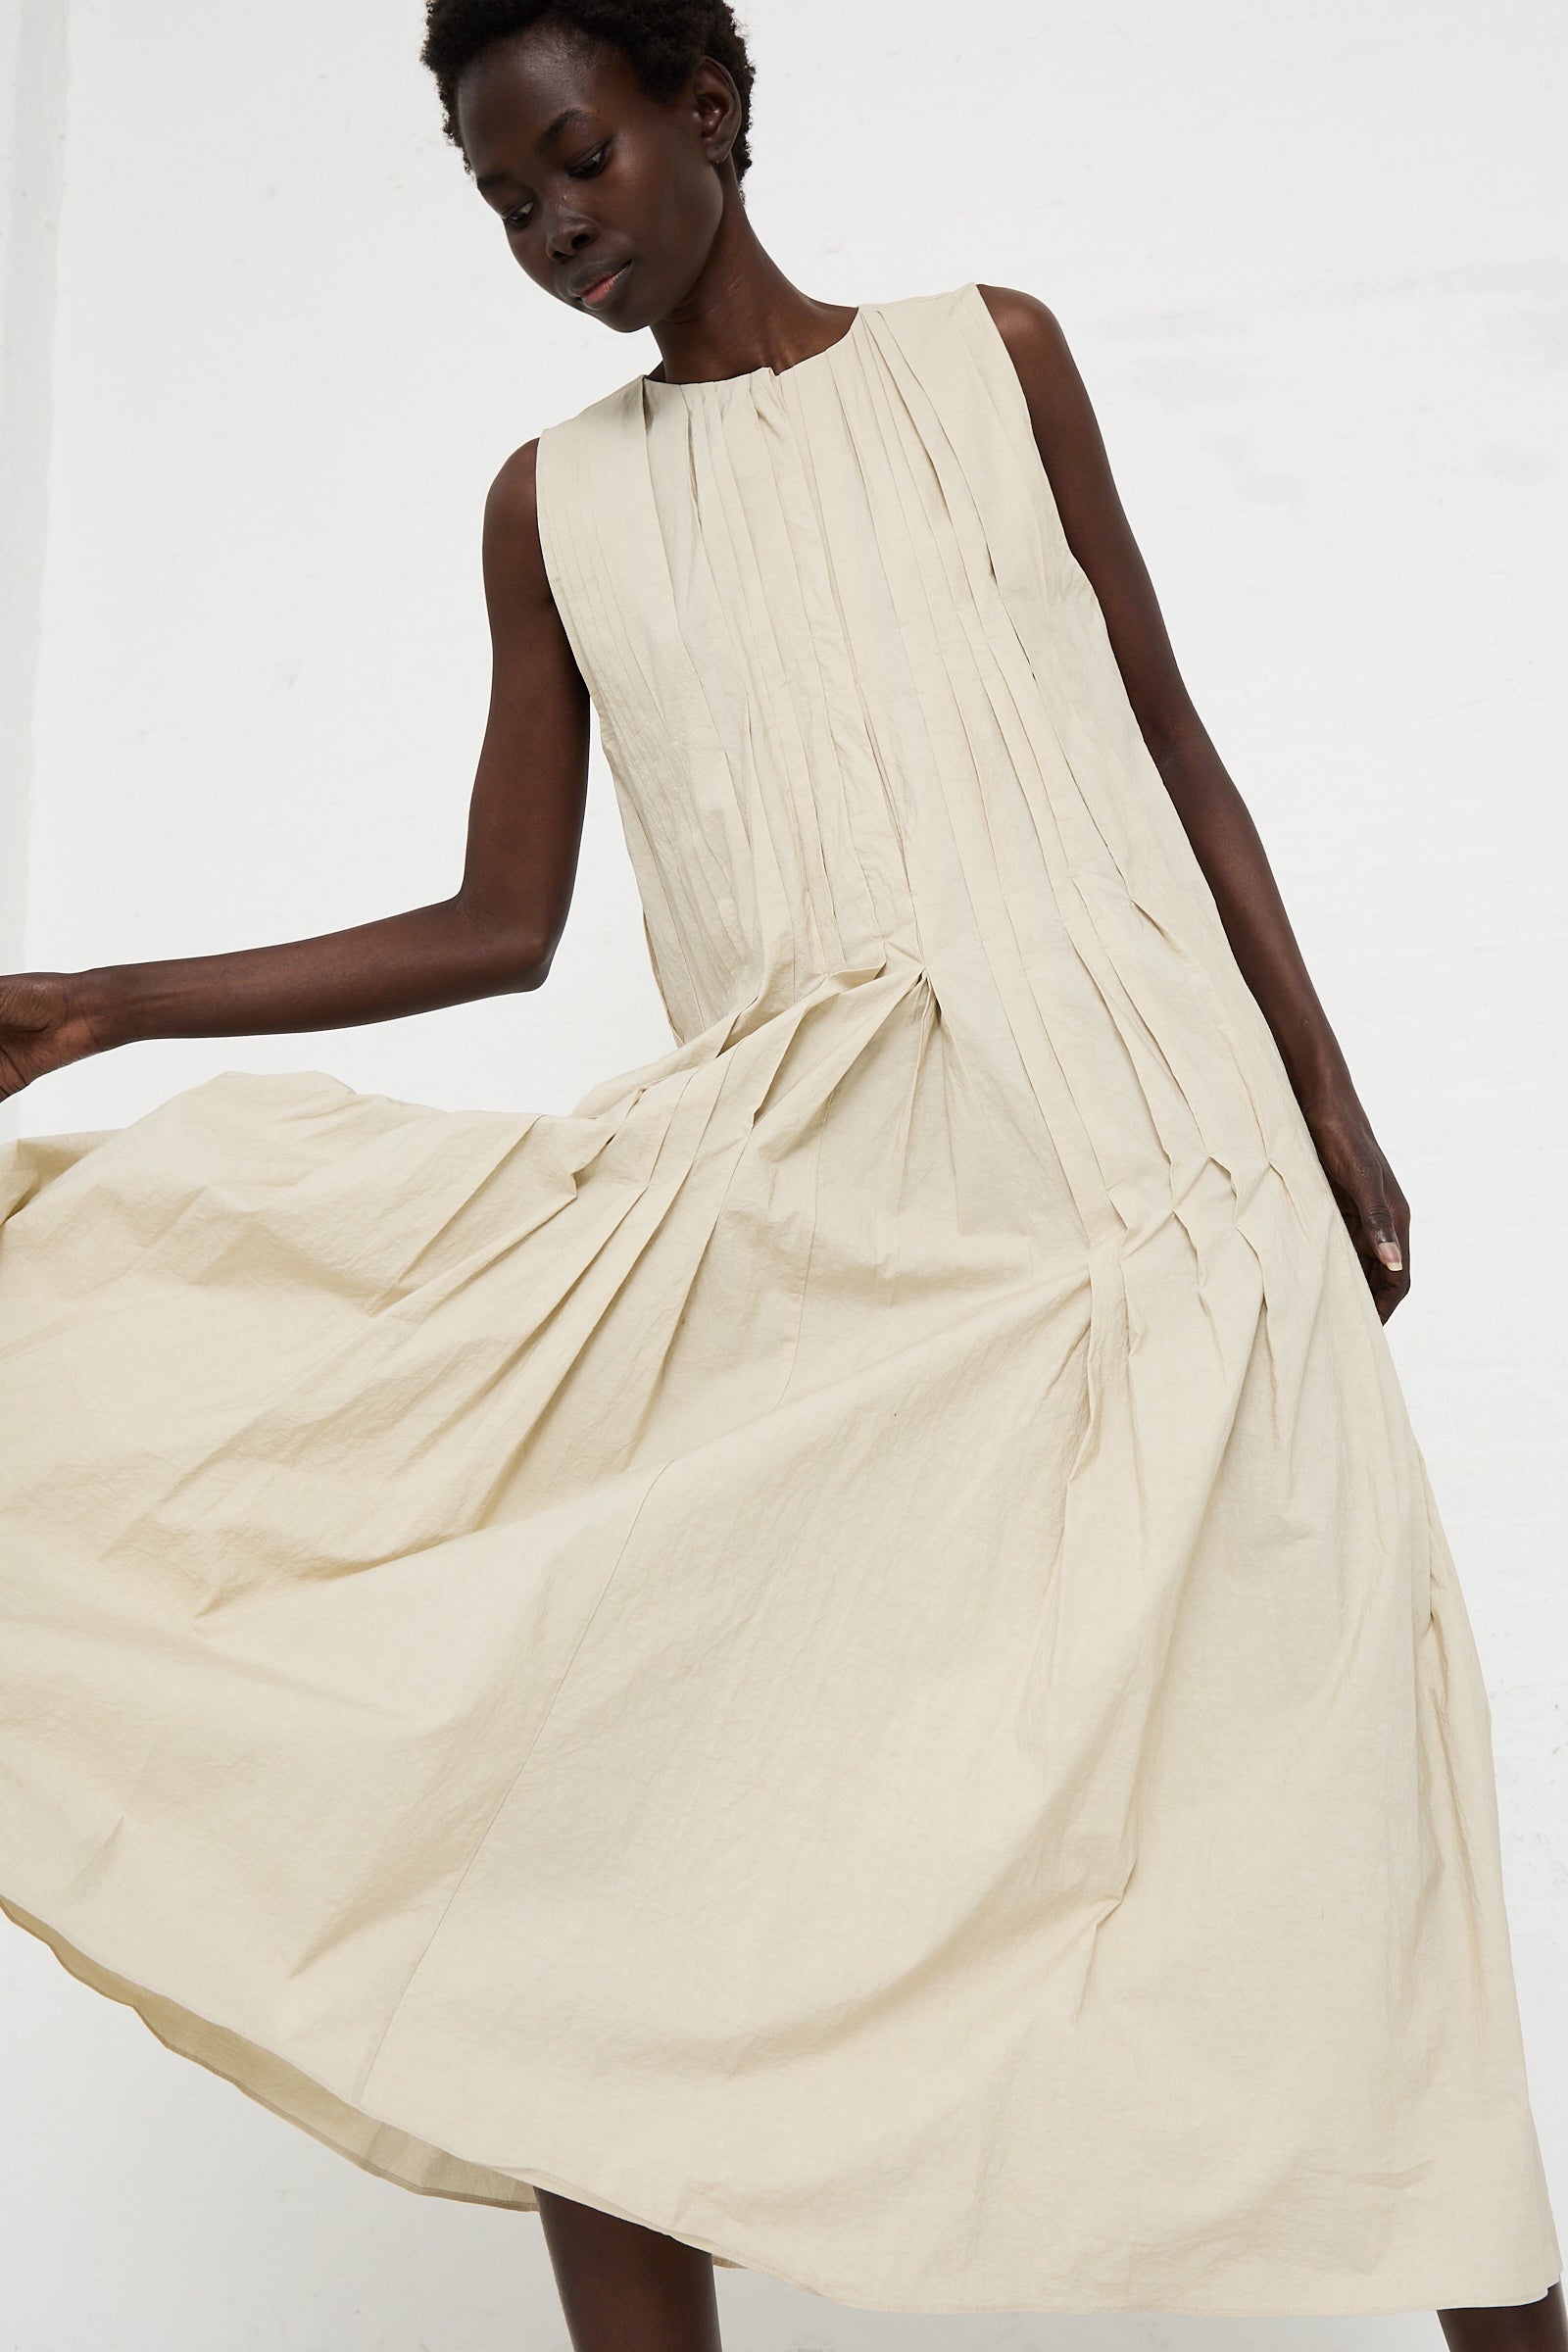 A person wearing the Lauren Manoogian Hand Pleat Dress in Greige crafted from a light-colored cotton/linen blend with pleated details on the front and a full skirt.